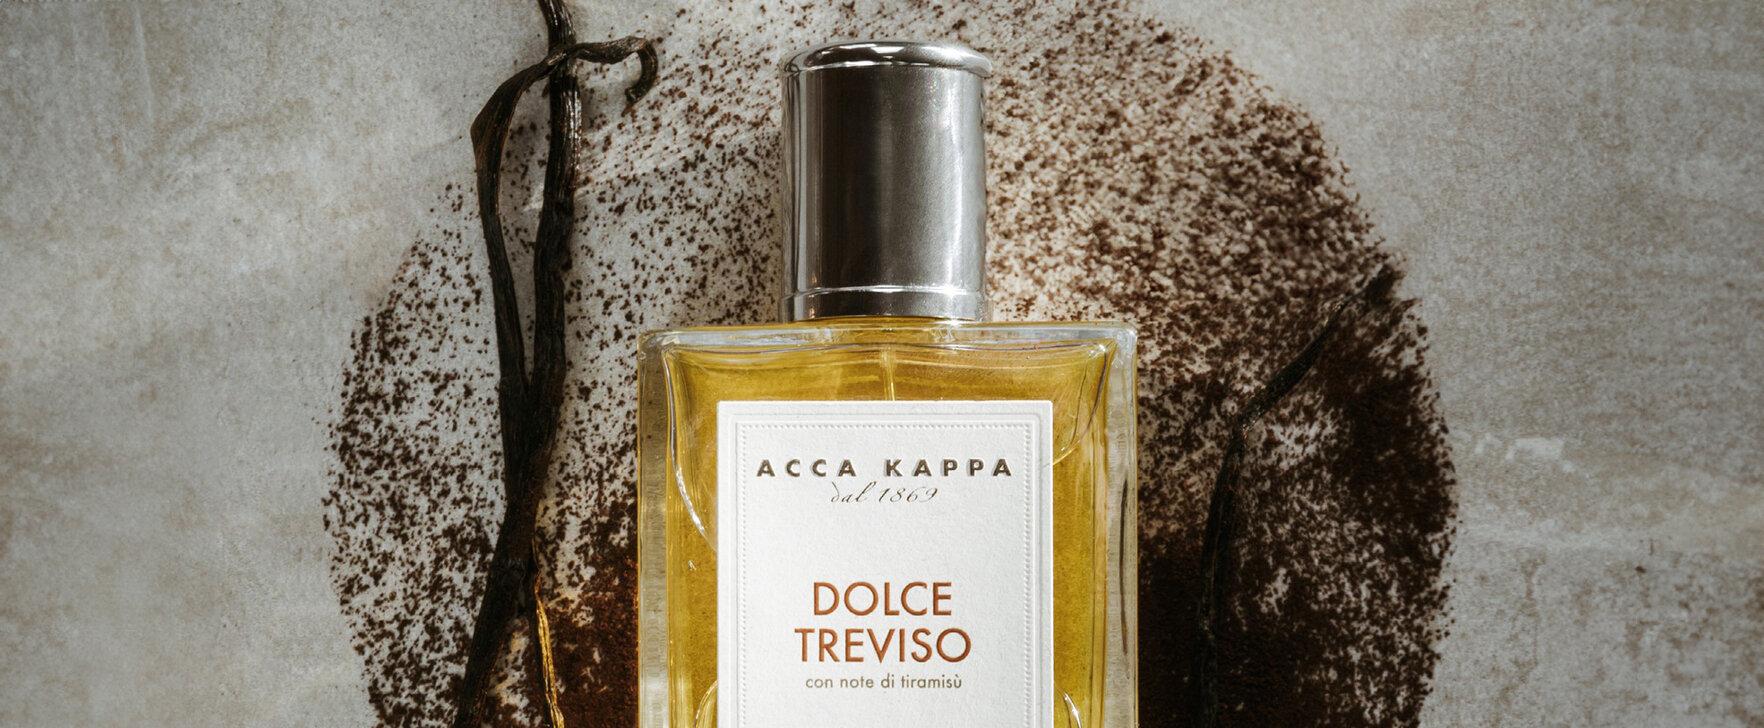 A Fragrance Trip to Treviso: The New Dolce Treviso Eau de Parfum From Acca Kappa